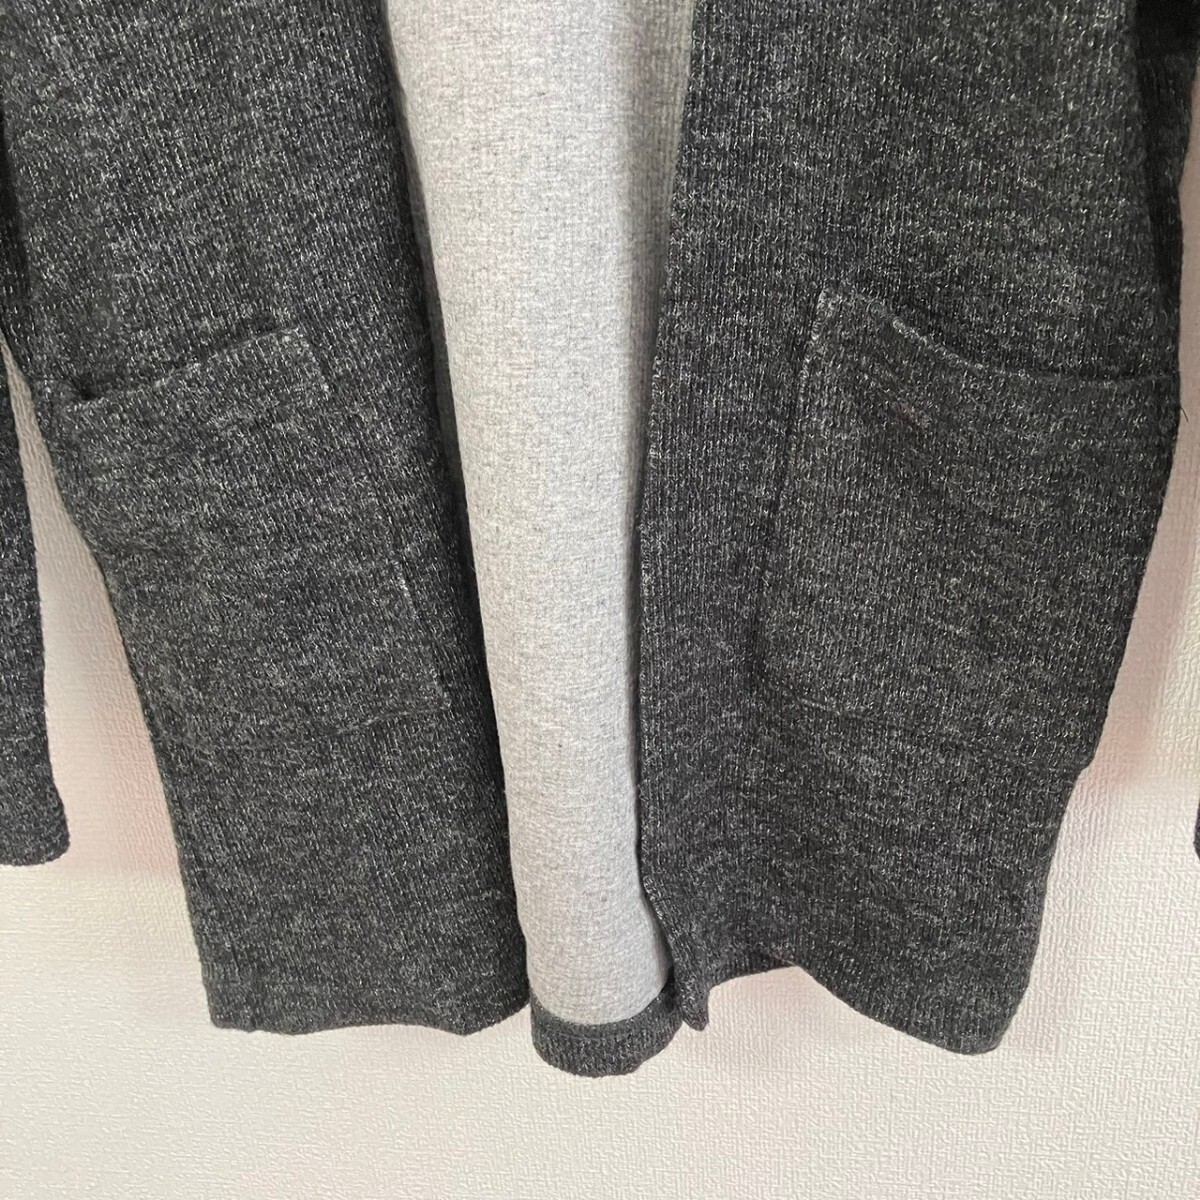 H8289NL made in Japan United Arrows green label relaxing green lable lilac comb ng size S cardigan dark gray men's 